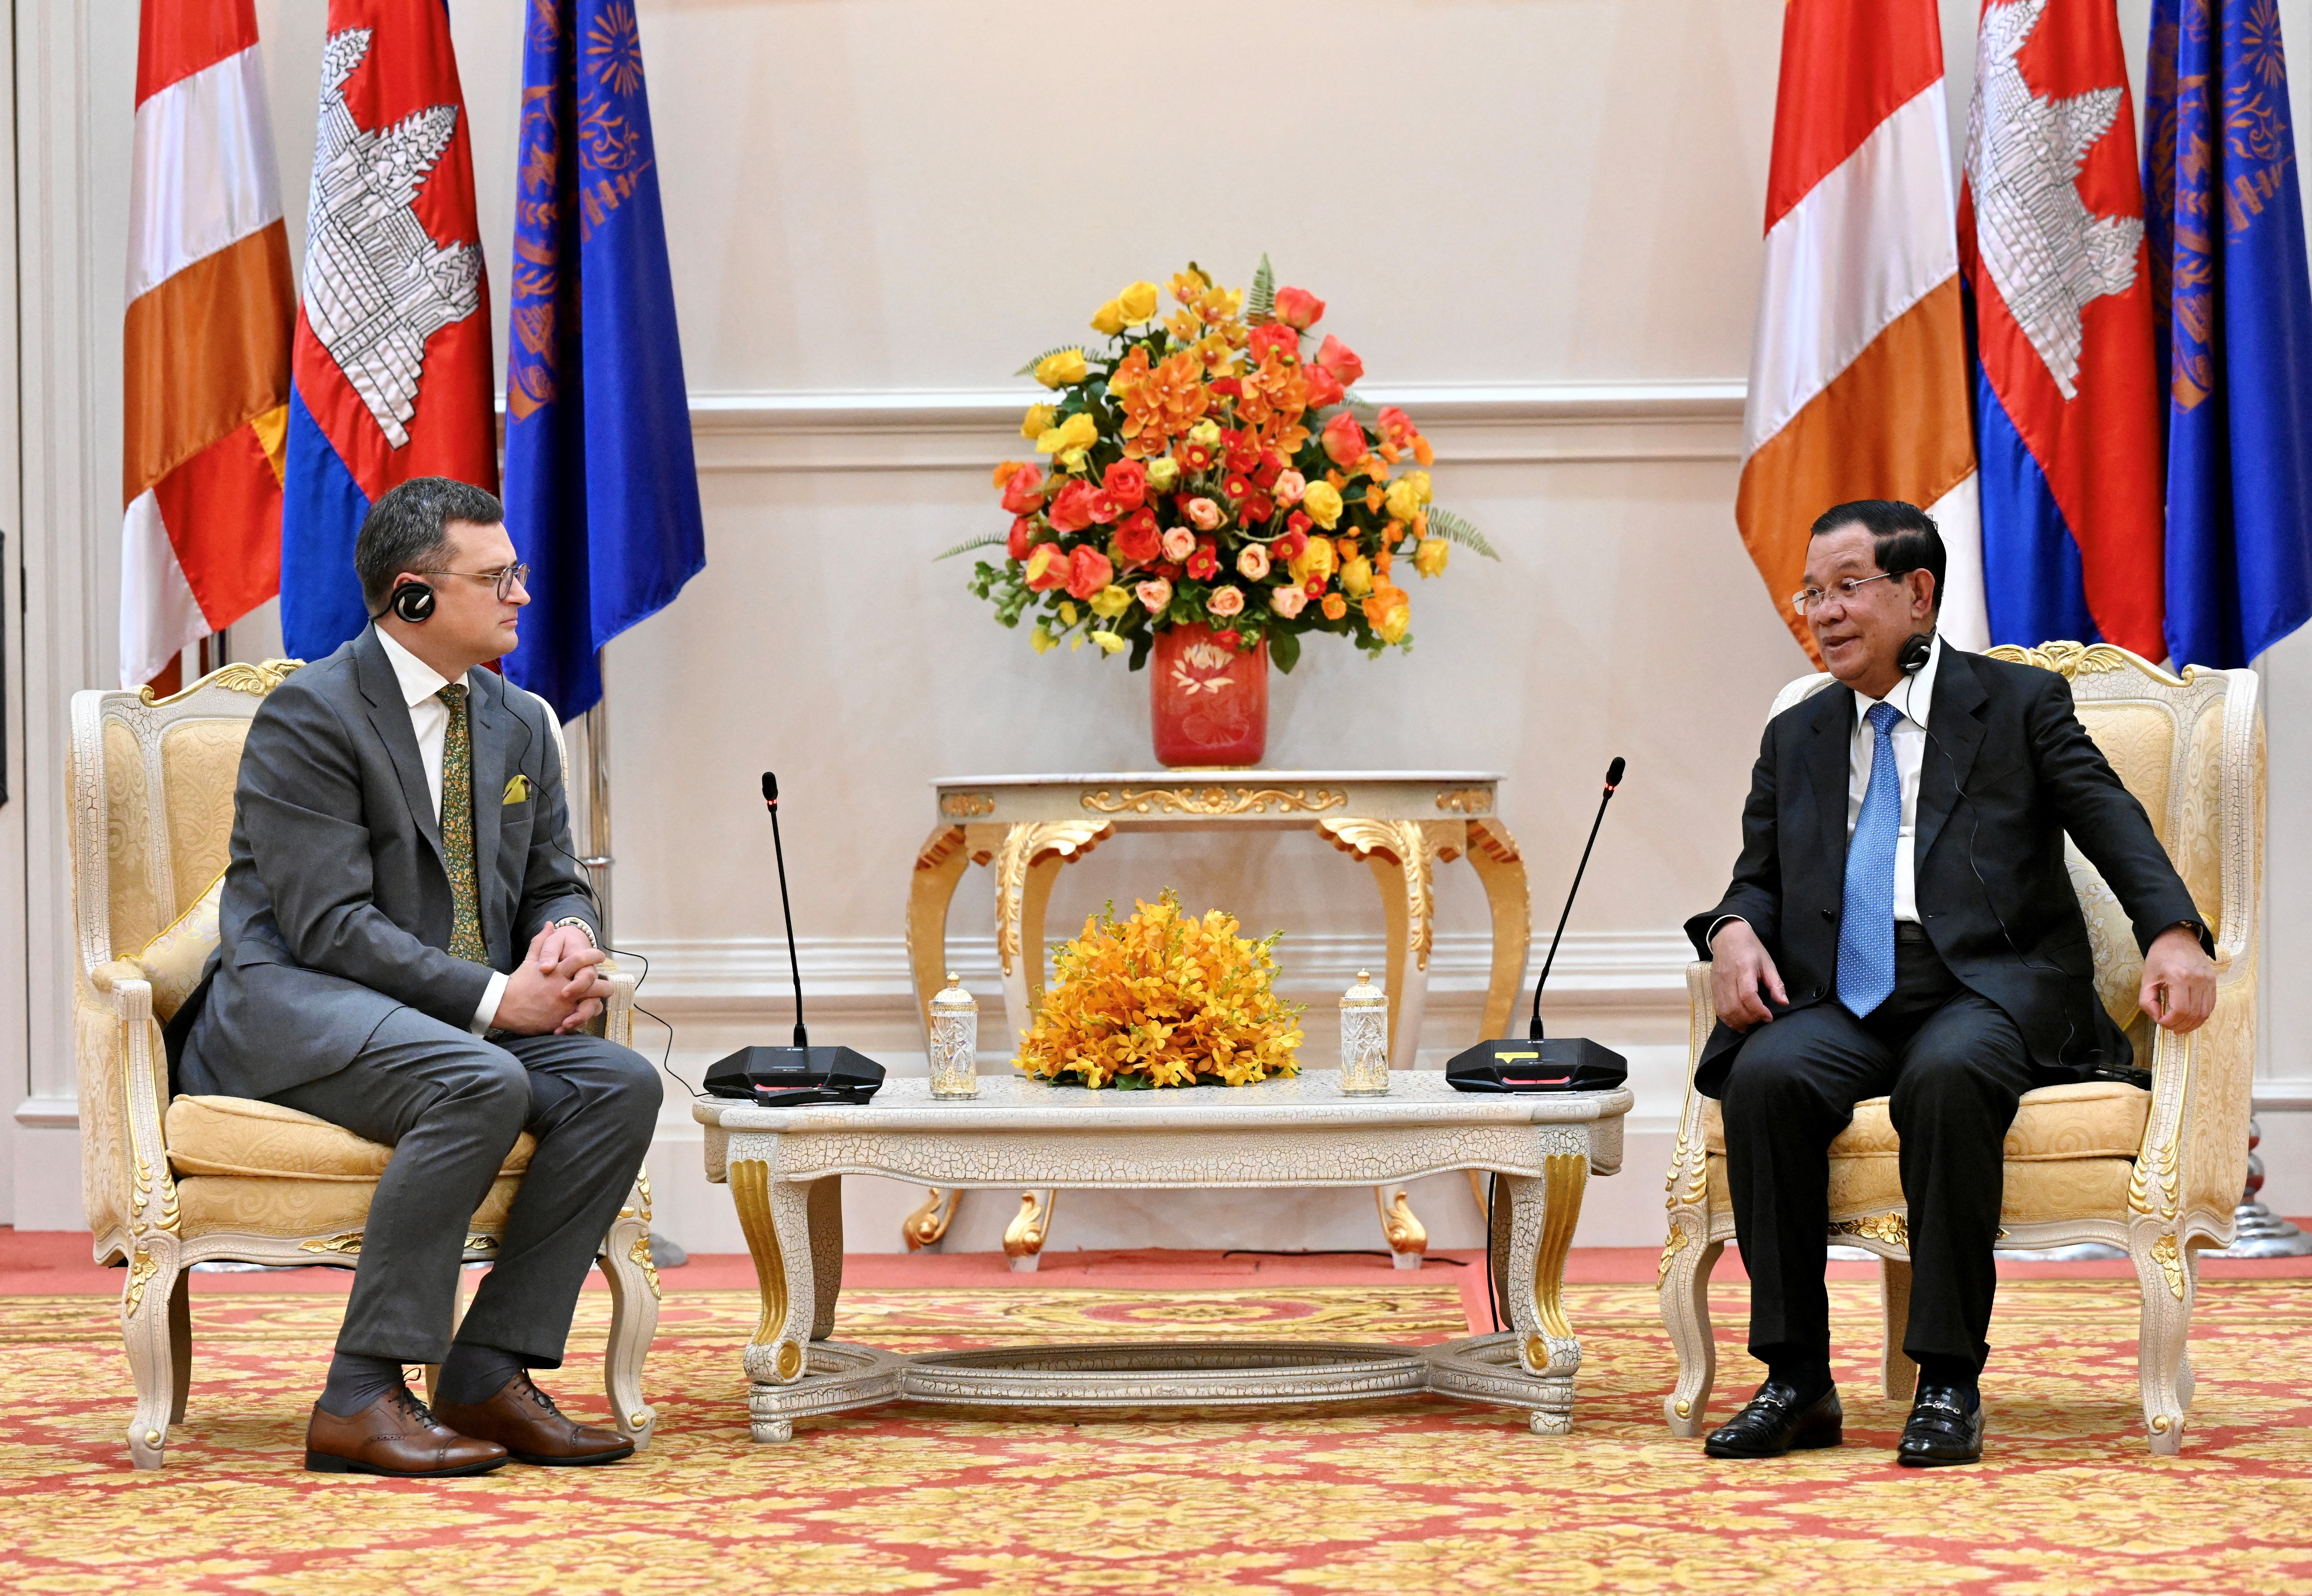 Cambodian Prime Minister Hun Sen welcomes Ukrainian Foreign Minister Dmytro Kuleba ahead of the ASEAN Summit at the Peace Palace in Phnom Penh